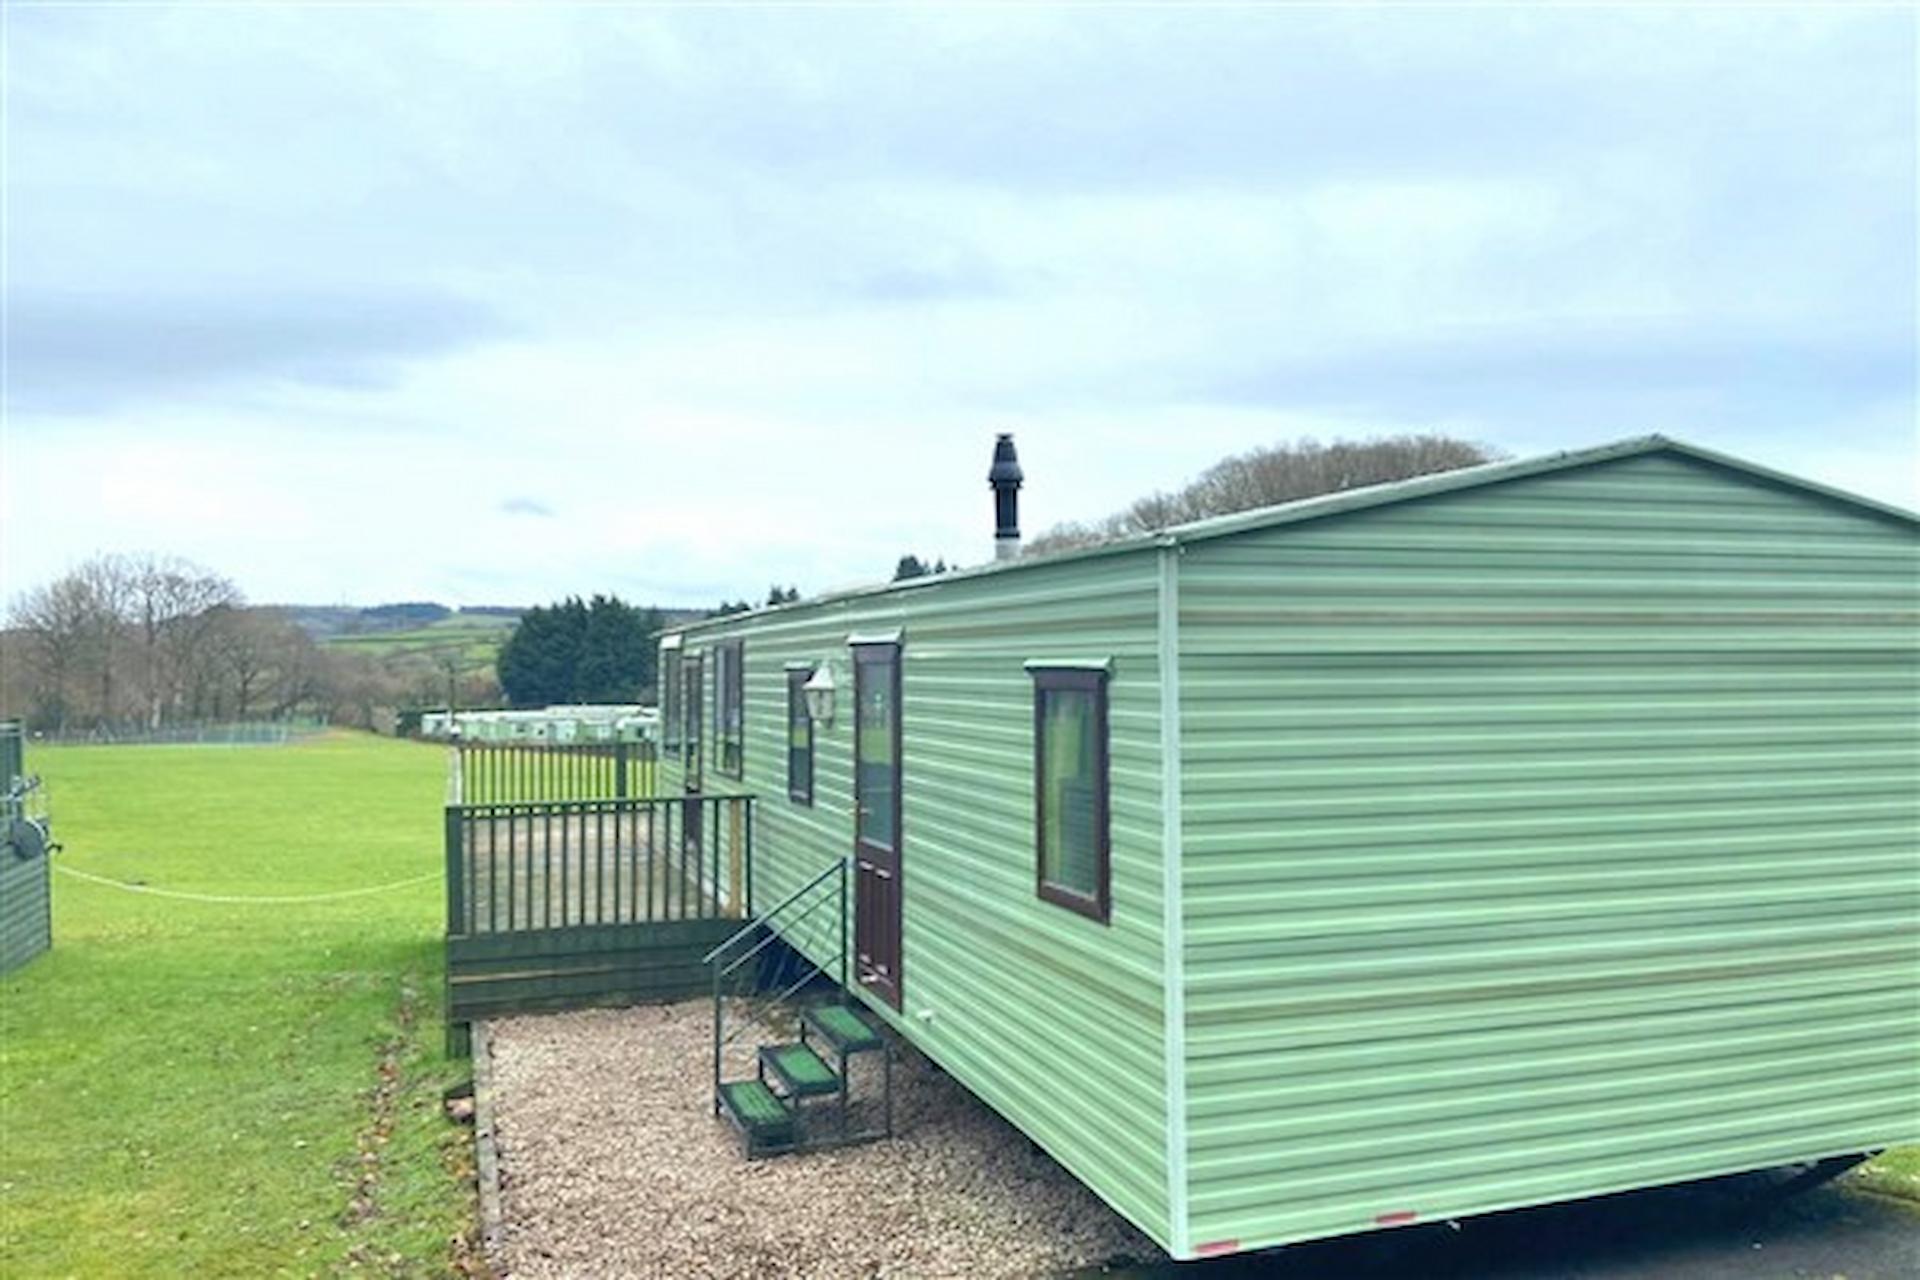 Expert Tips To Let You Choose Static Caravans You May Fall In Love With